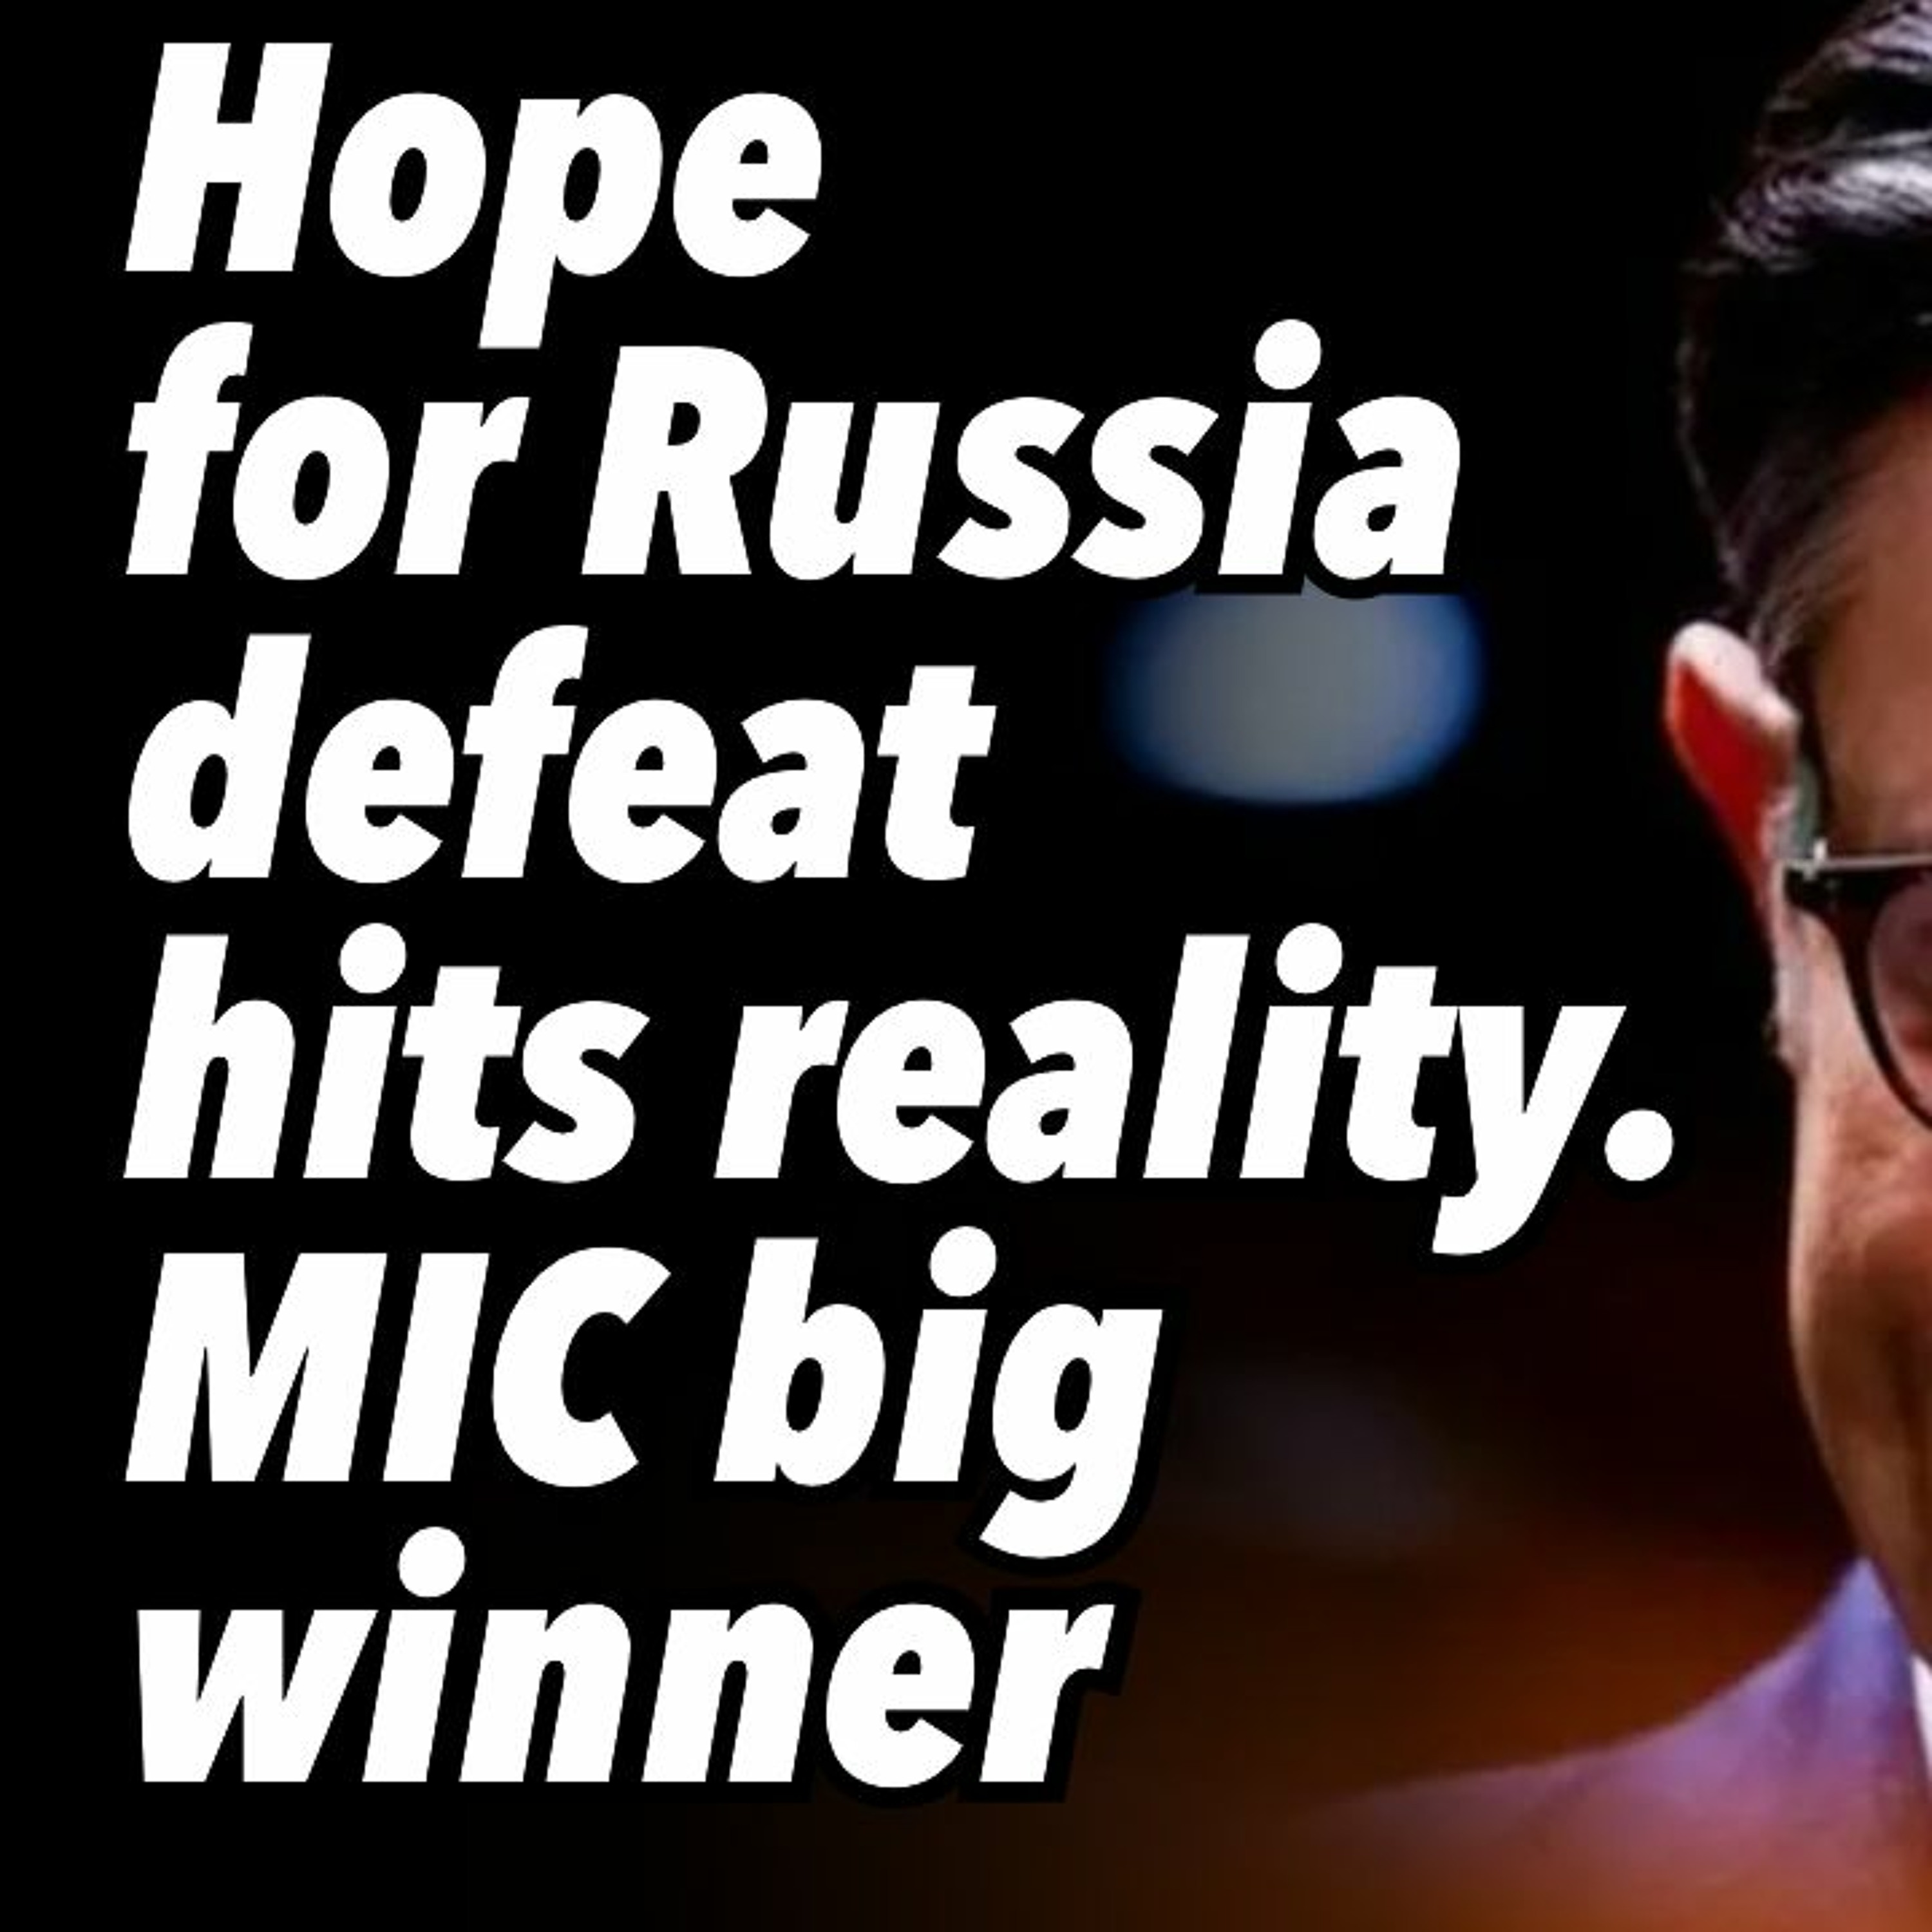 Hope for Russia defeat hits reality. MIC big winner